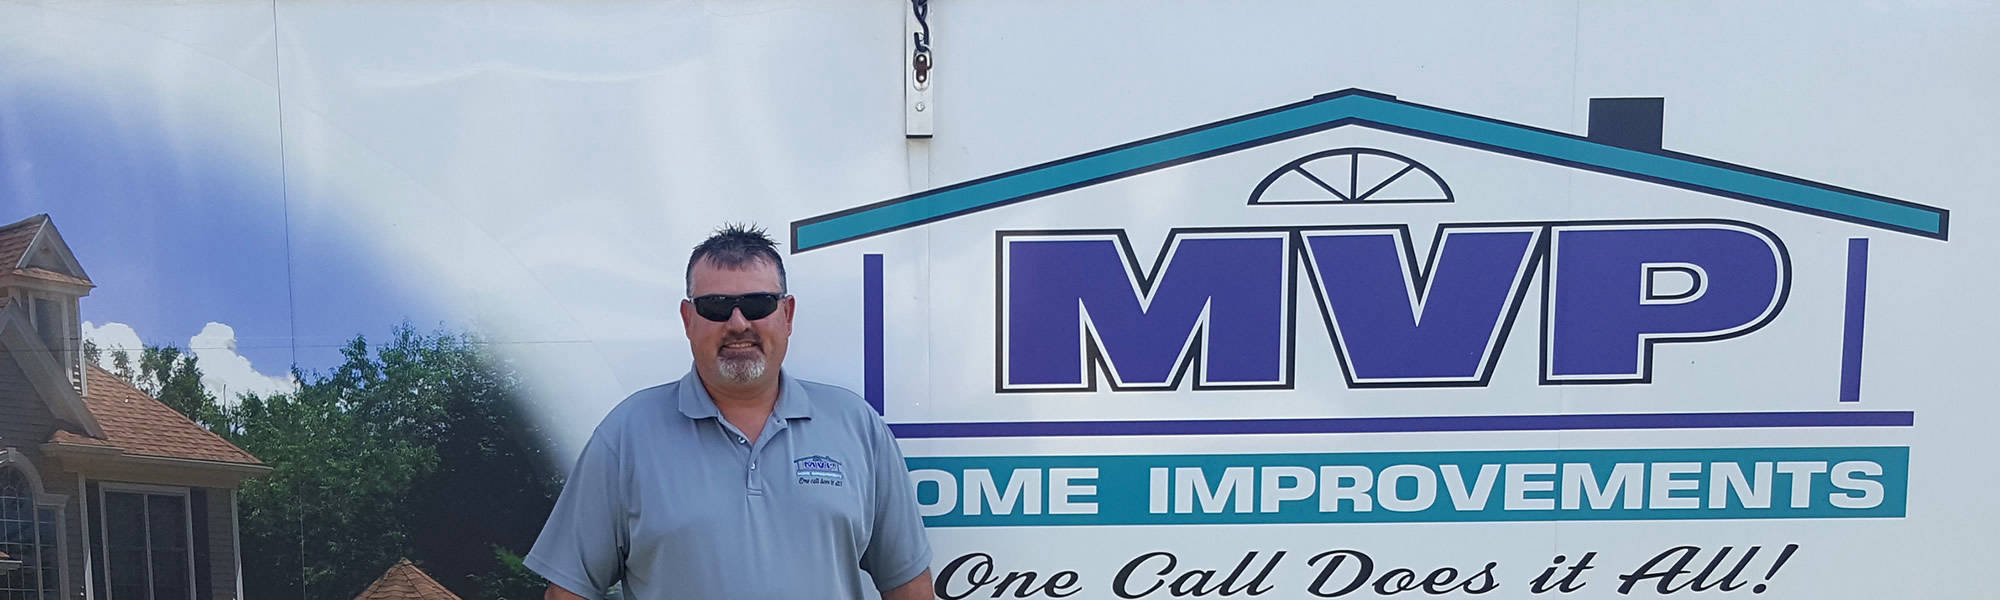 MVP Home Improvements - Commercial Contractor serving Merrimack Valley and Southern New Hampshire